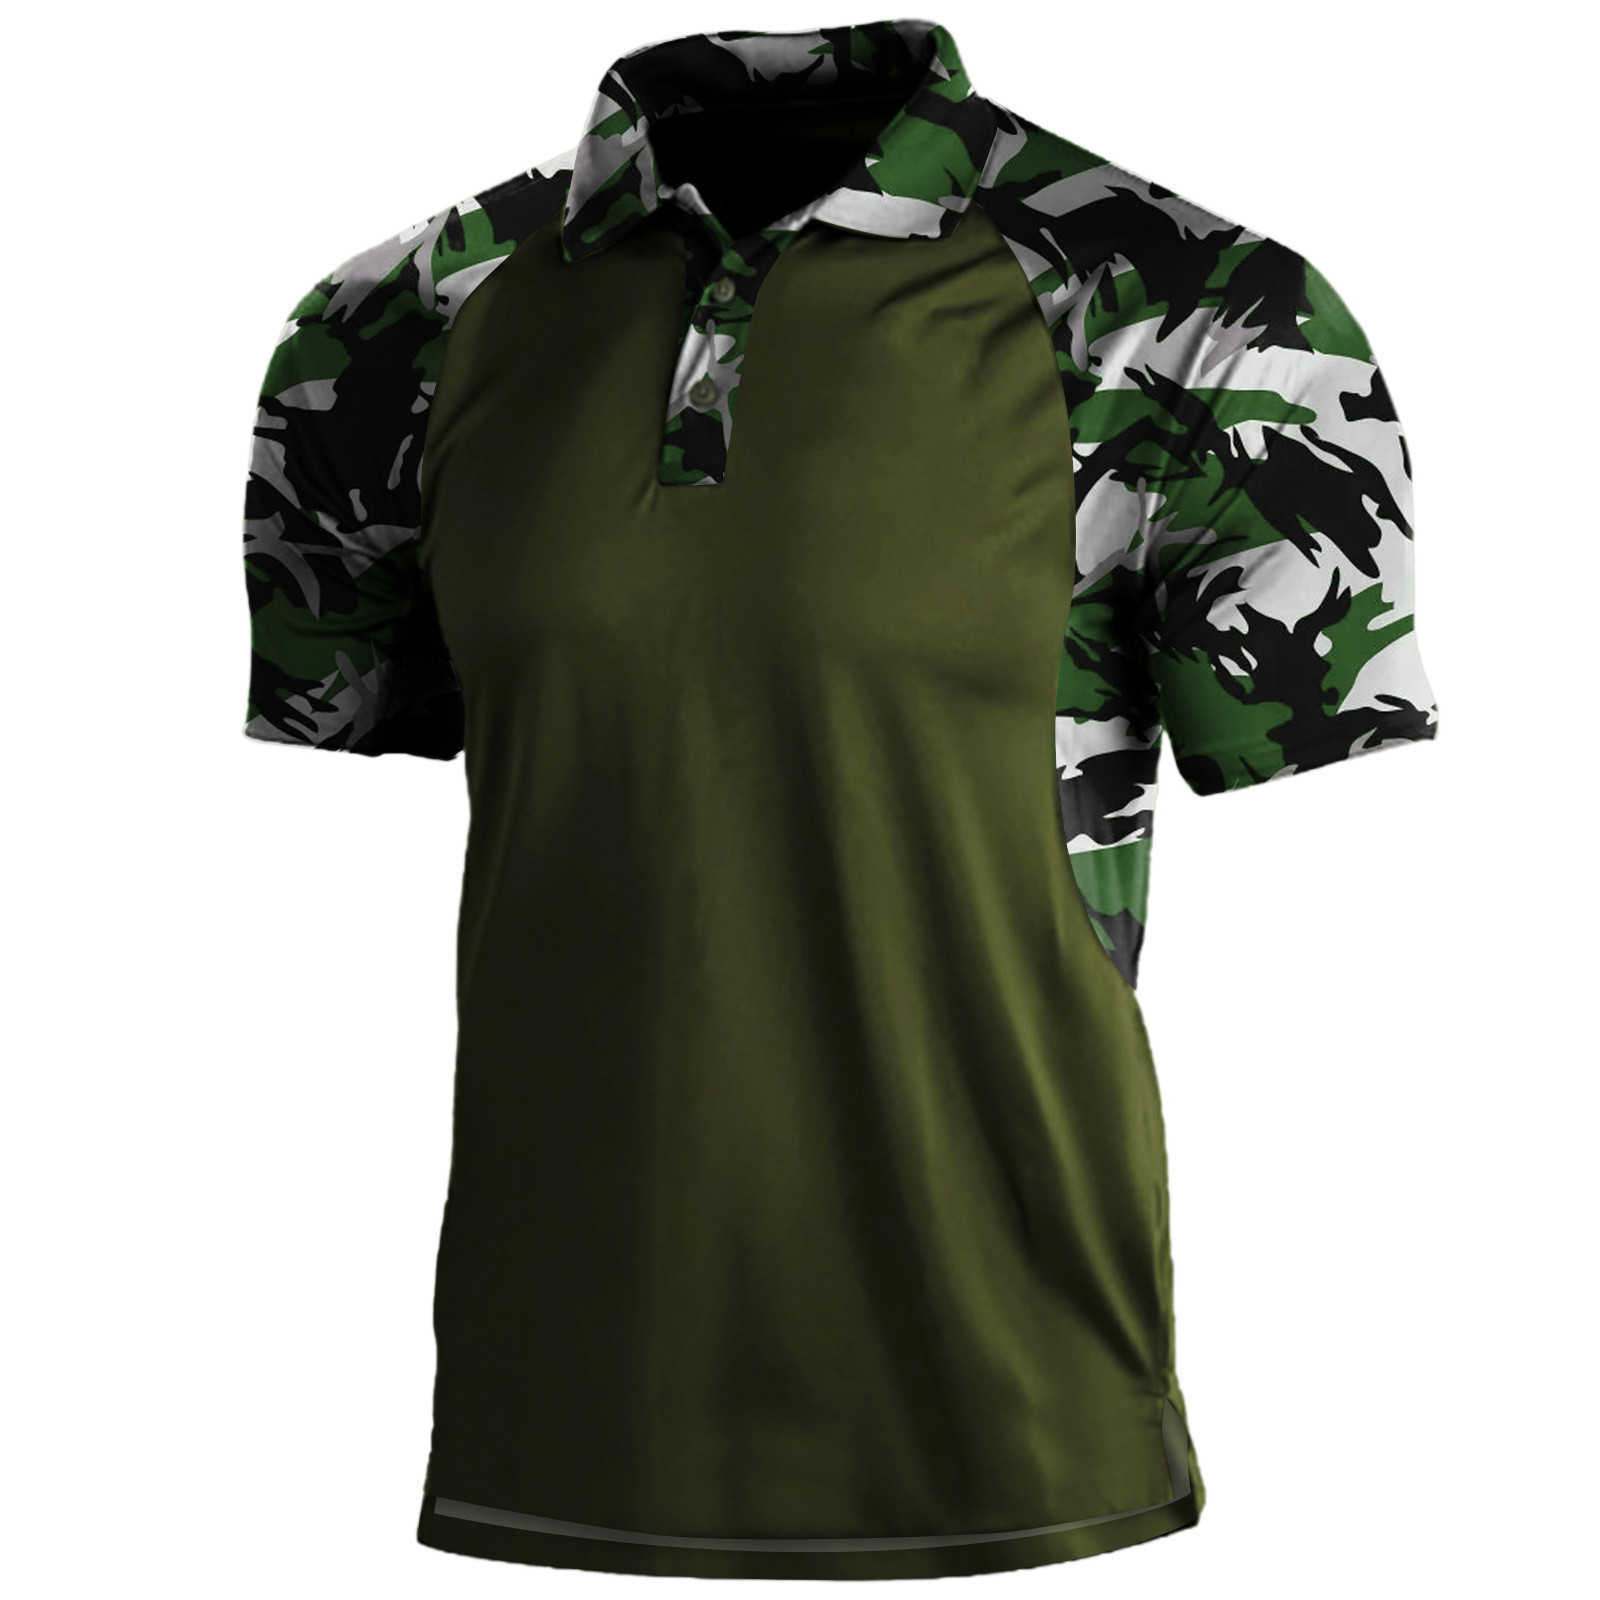 Men's T-Shirts Summer Military Tactical T Shirts Men Quick Dry Outdoor Nature Hike Shirt Short Sleeve Combat Climbing Camouflaged Clothing 2022 W0322